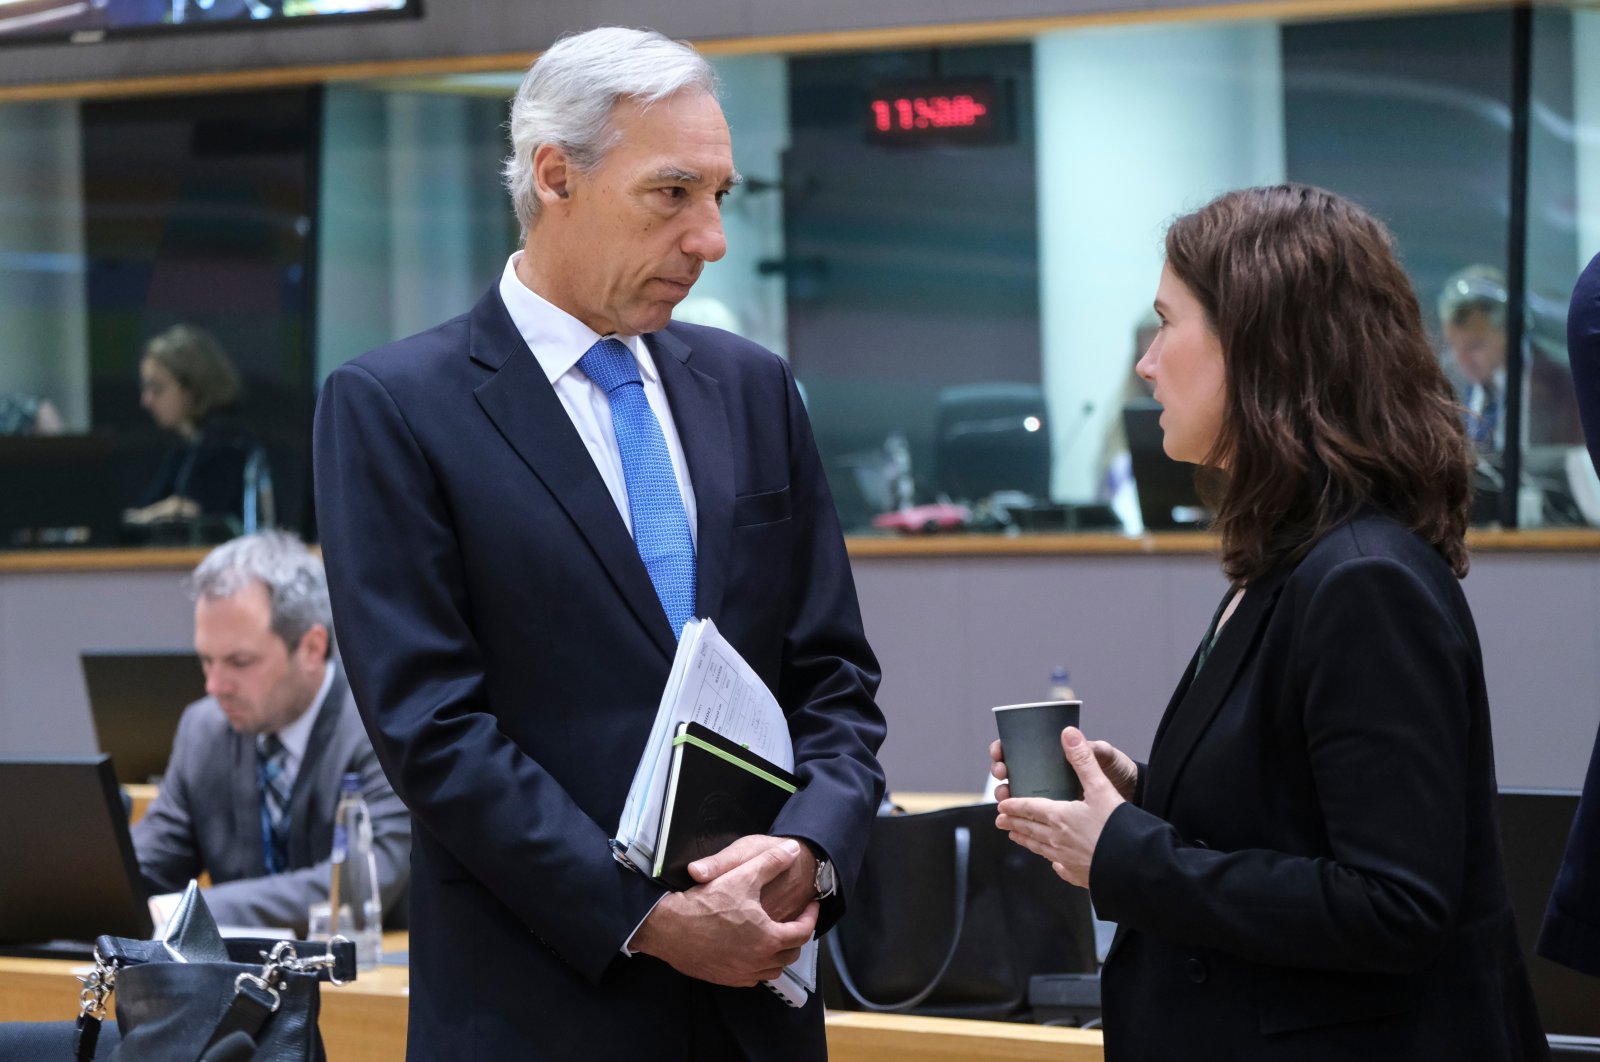 Foreign Minister Joao Gomes Cravinho (L) arrives for a Foreign Affairs Council (FAC) meeting at the EU headquarters in Brussels, Belgium, May 16, 2022. (Shutterstock Photo)